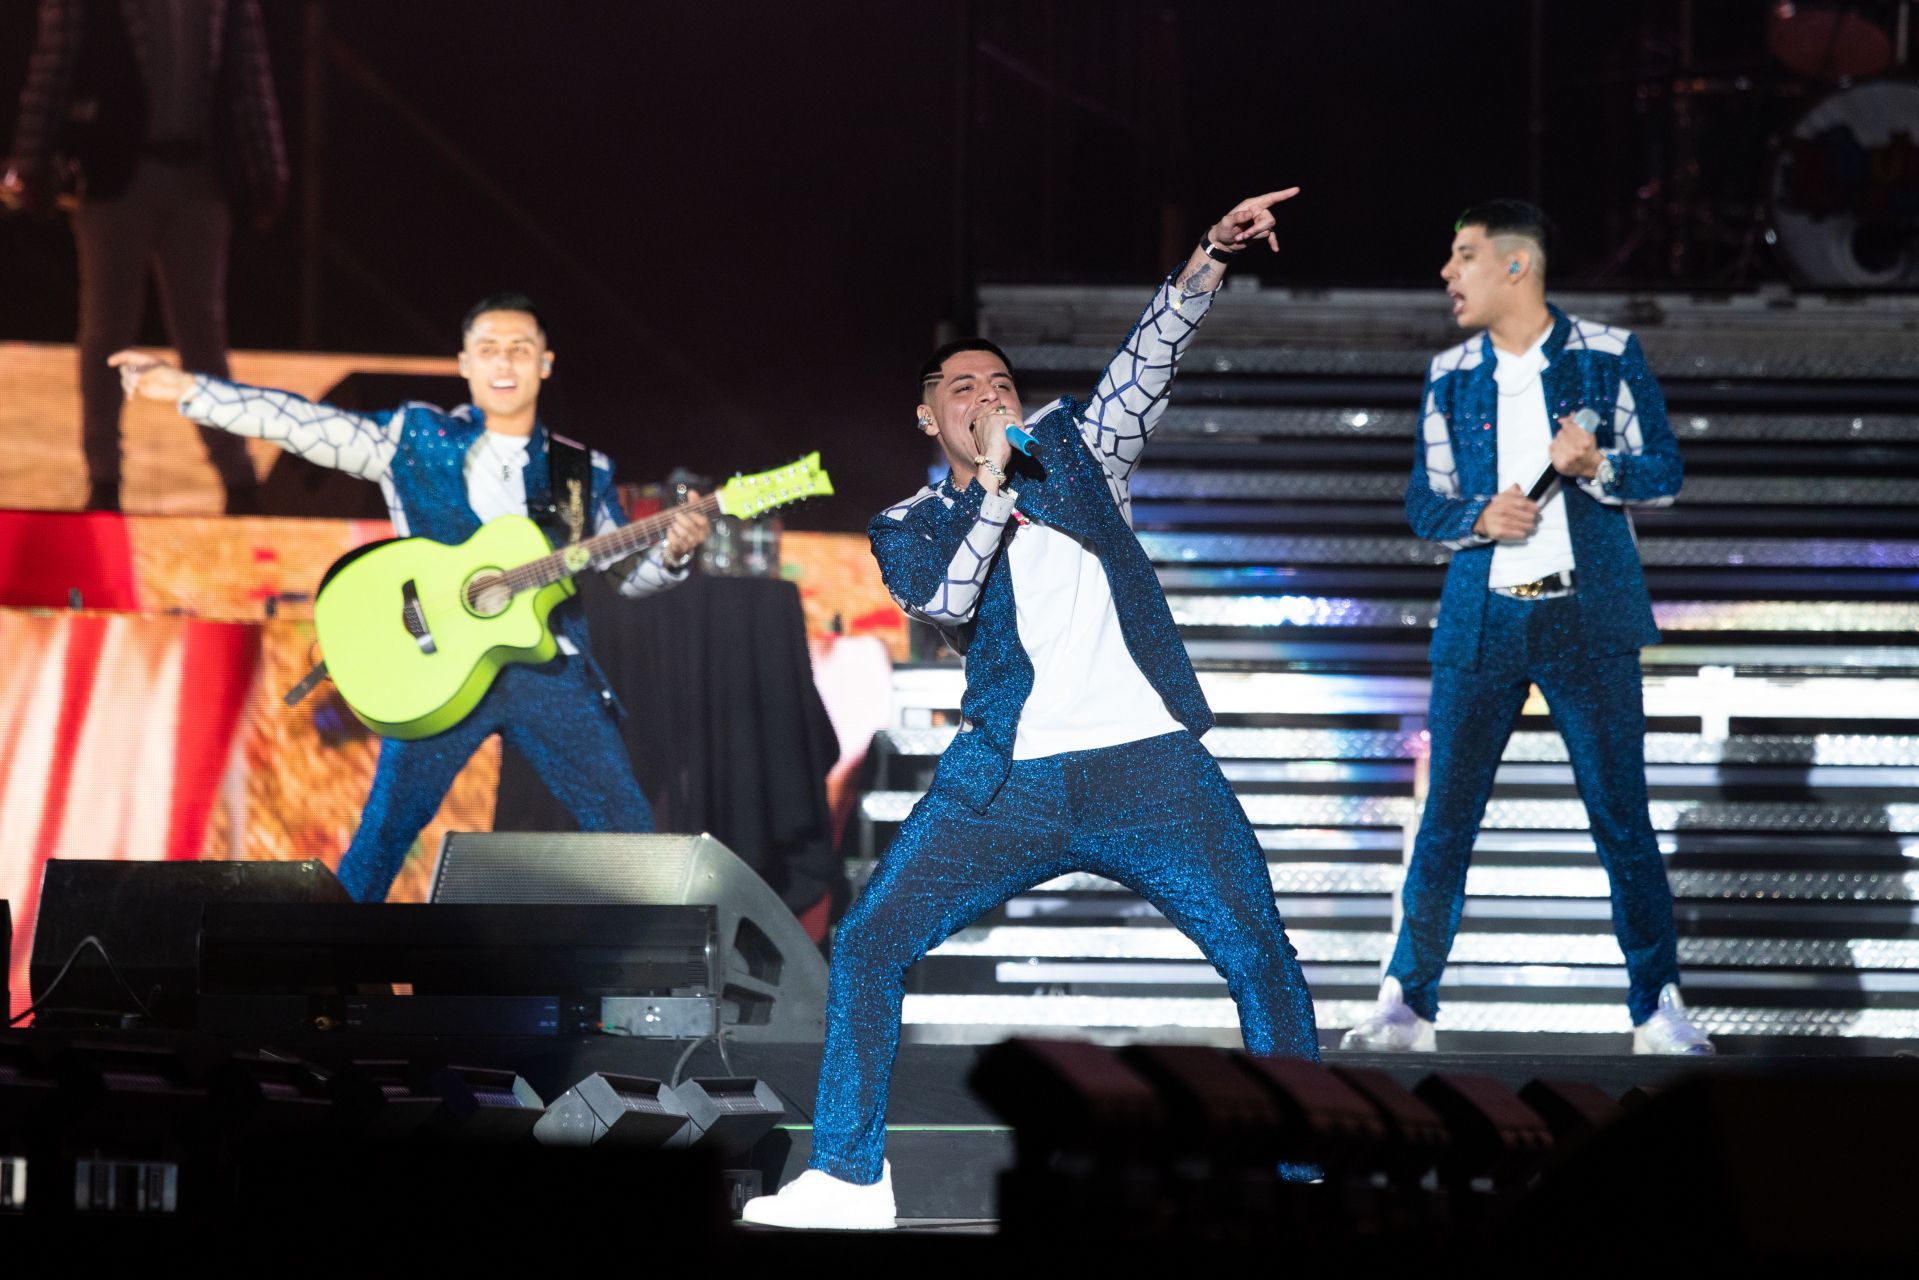 MEXICO CITY, MARCH 24, 2022.- First concert of four at the Foro Sol by the regional Mexican band Grupo Firme who presents their Enfiestados y Amanecidos tour, Tour 2022. PHOTO: EDGAR NEGRETE/CUARTOSCURO.COM